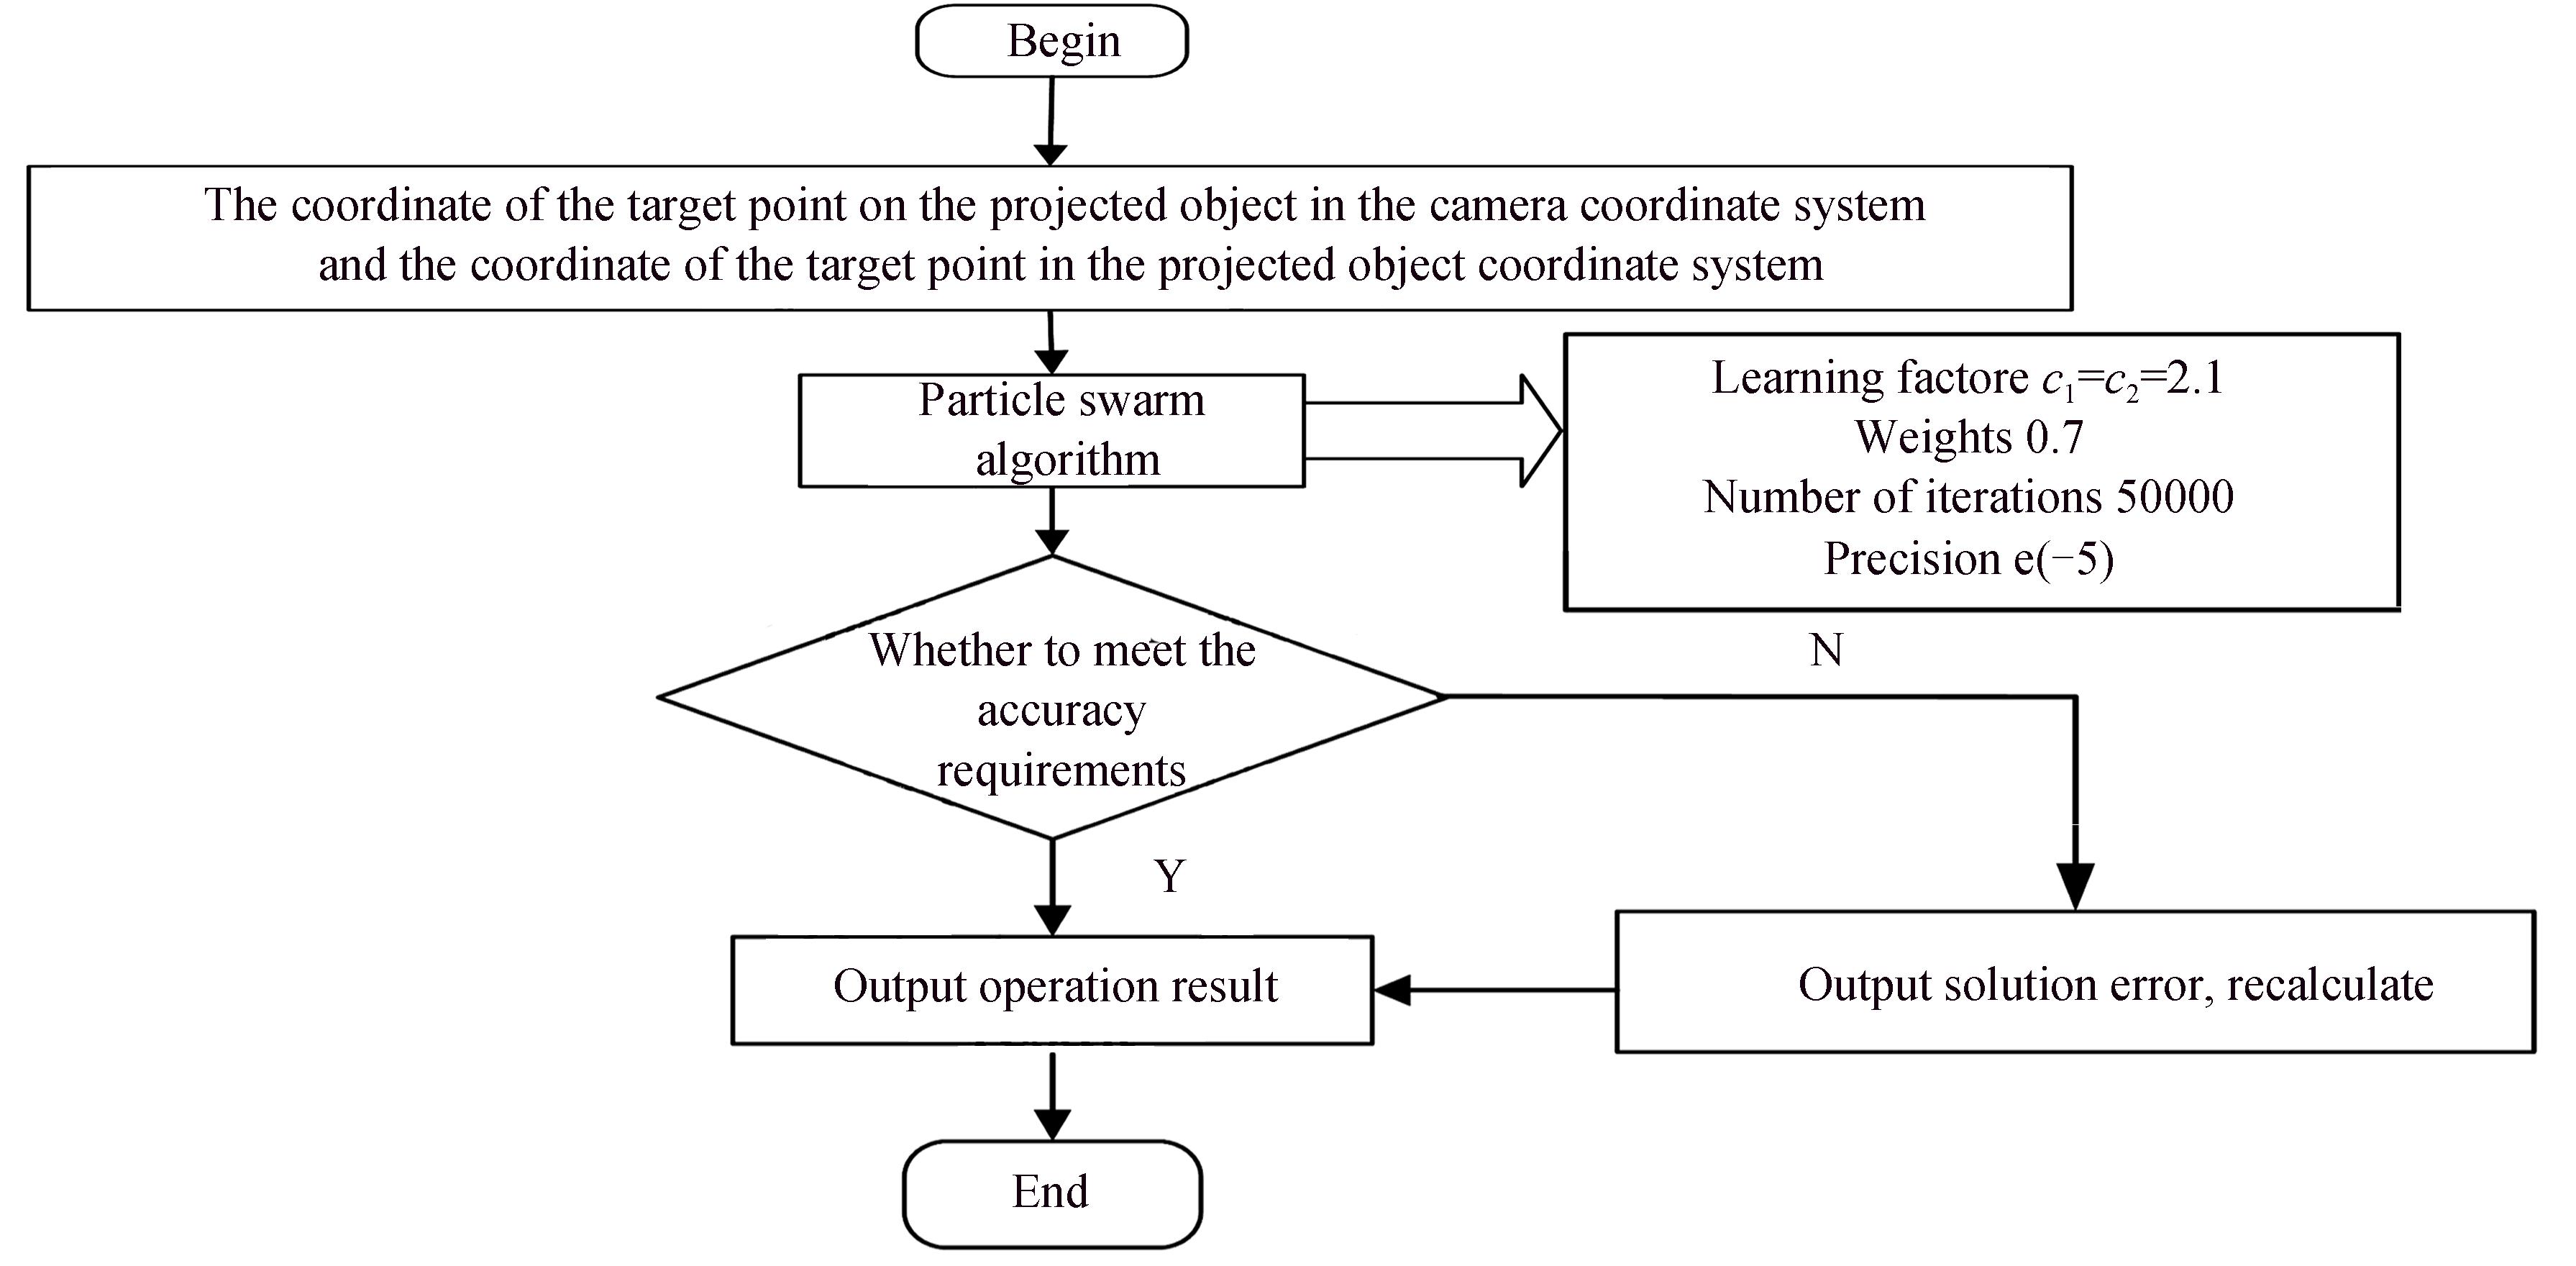 The particle swarm algorithm solves the flow chart of the coordinate conversion relationship between the monocular camera and the projected object